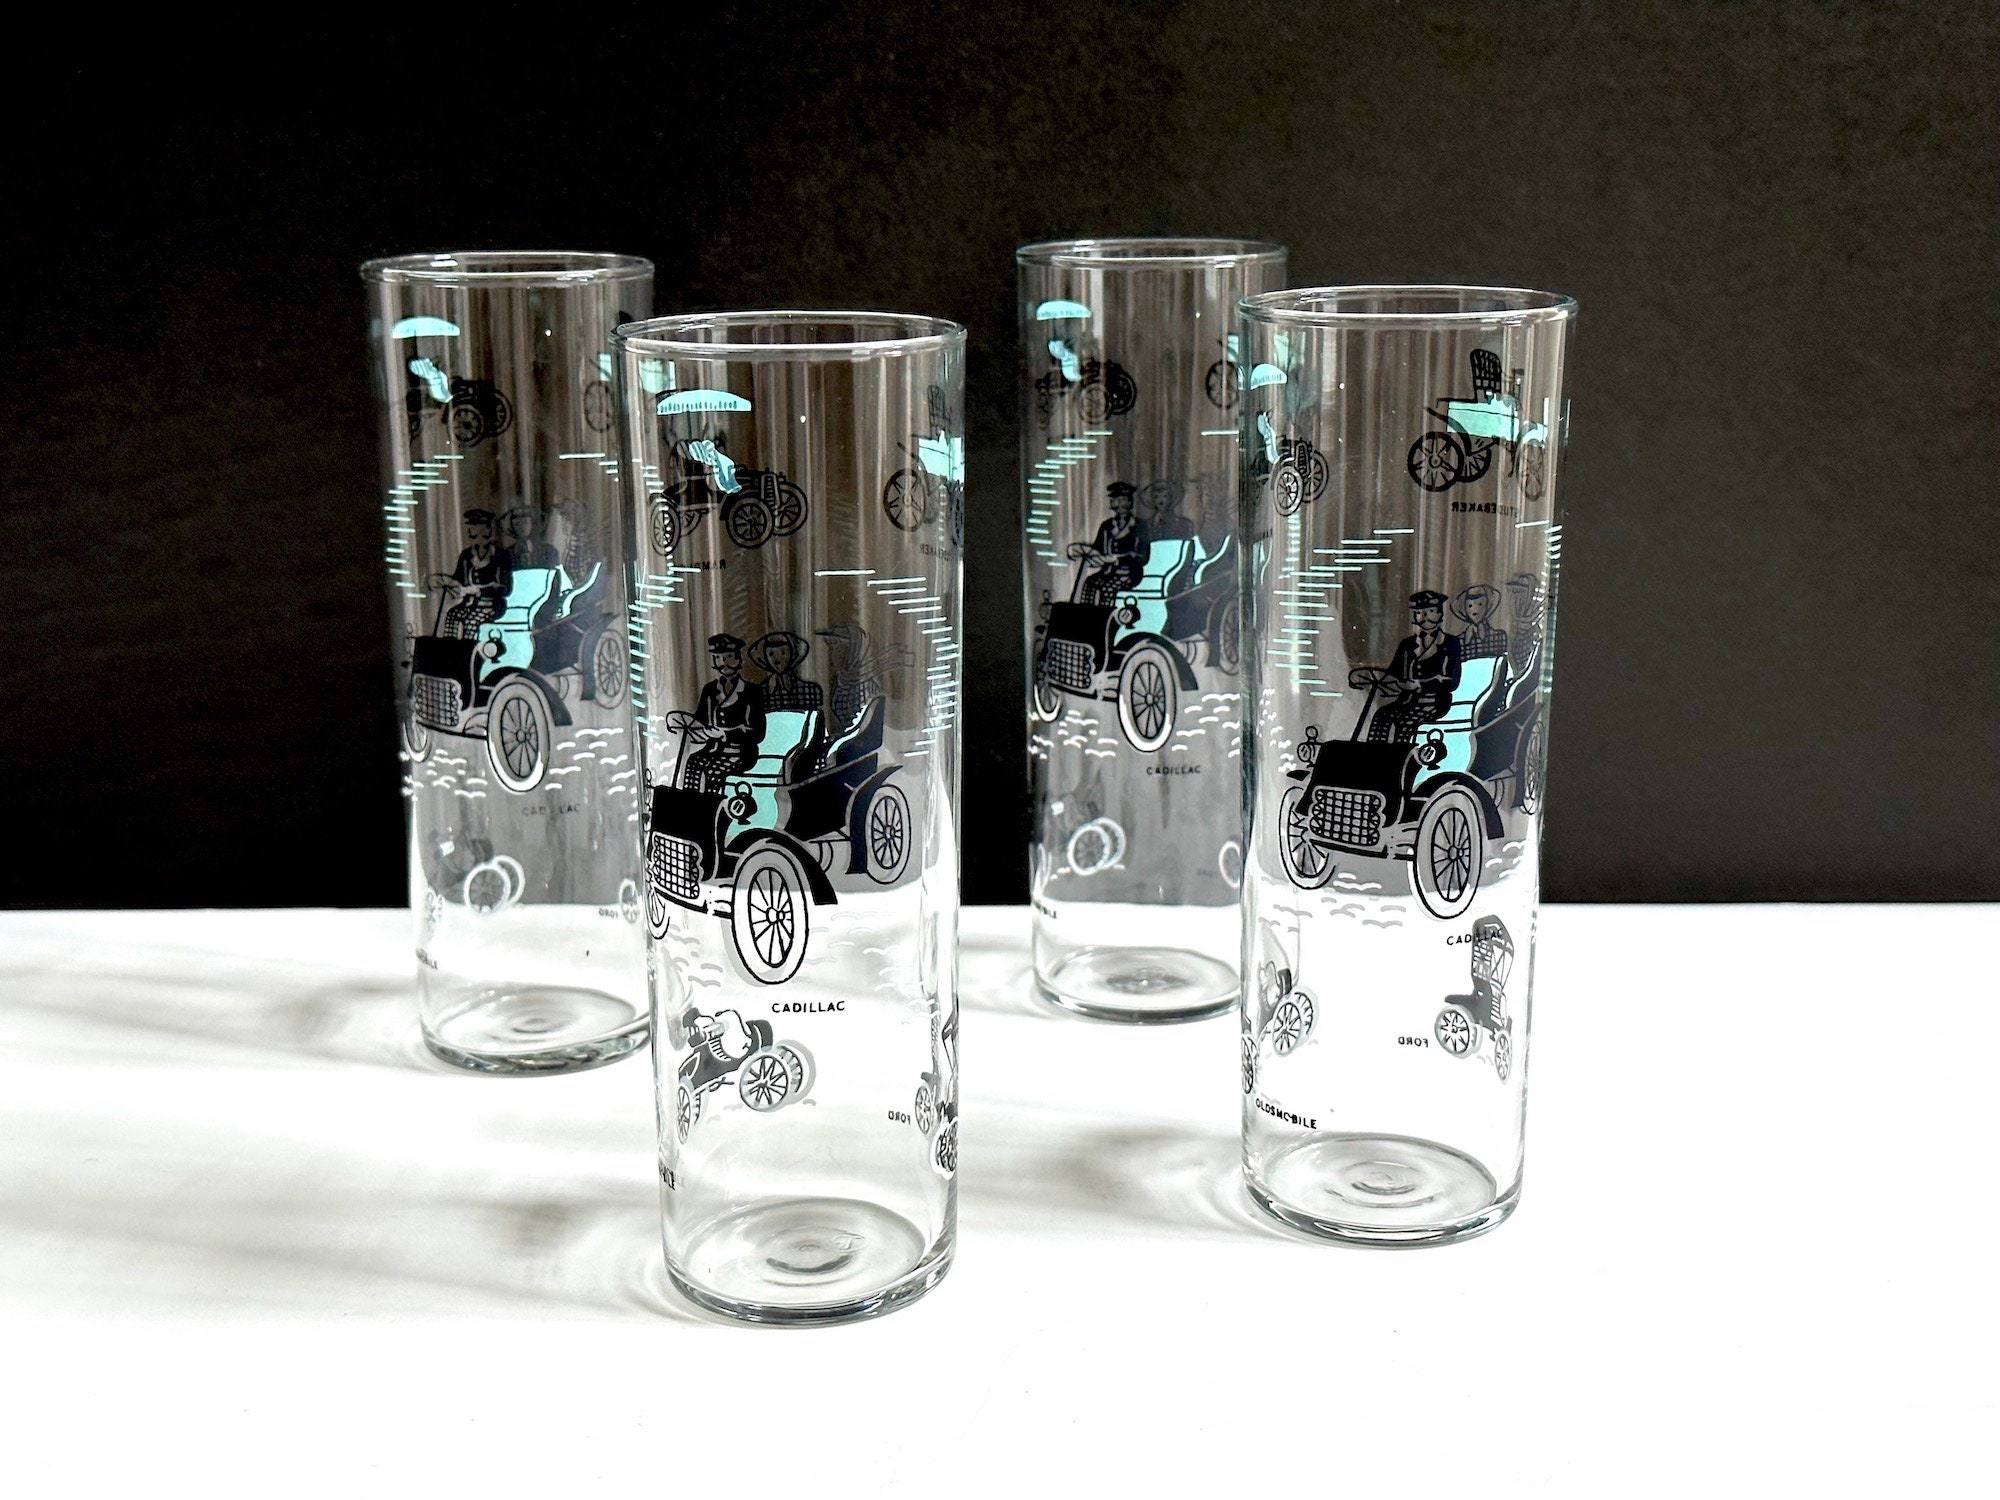 Set of 4 Atomic Fish & Arrows Turquoise, Pink, Gold Tom Collins Glasses,  Unused